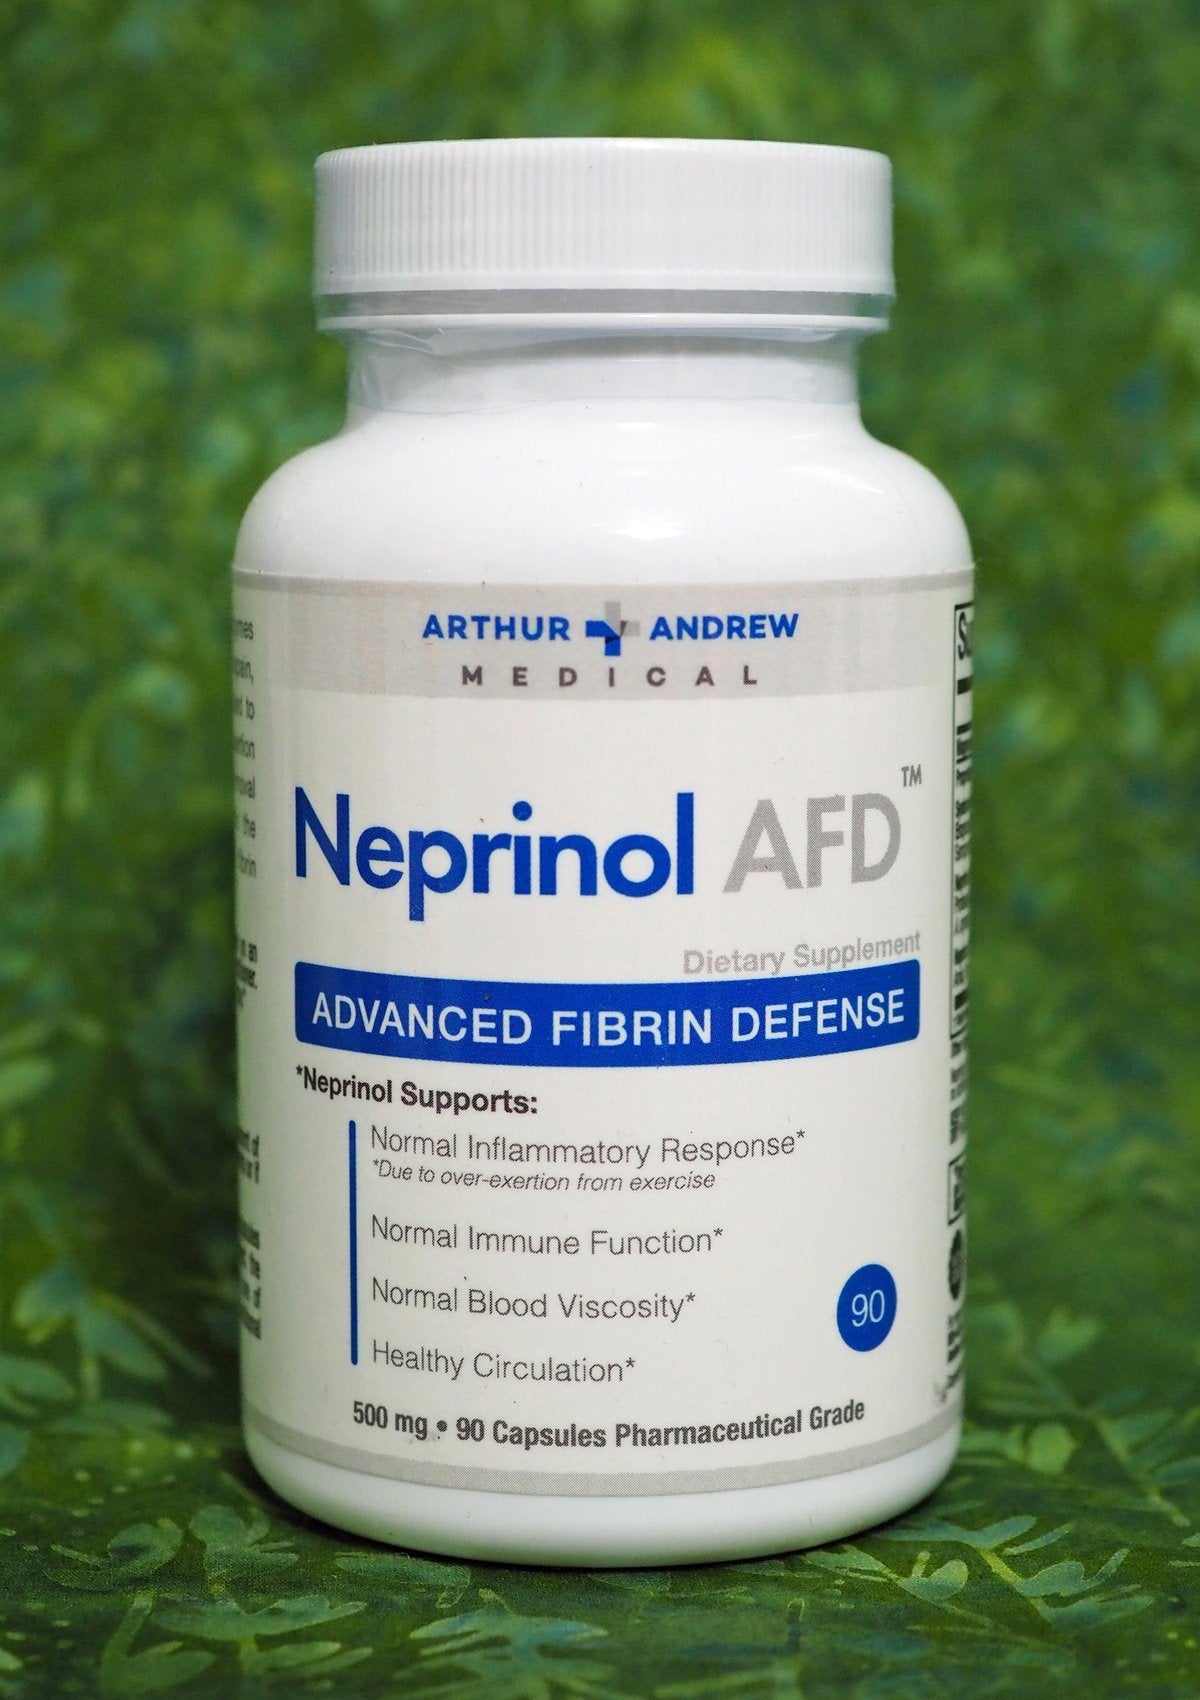 Neprinol AFD provides the right blend of systemic enzymes for proper circulation, improved blood viscosity, and joint comfort.